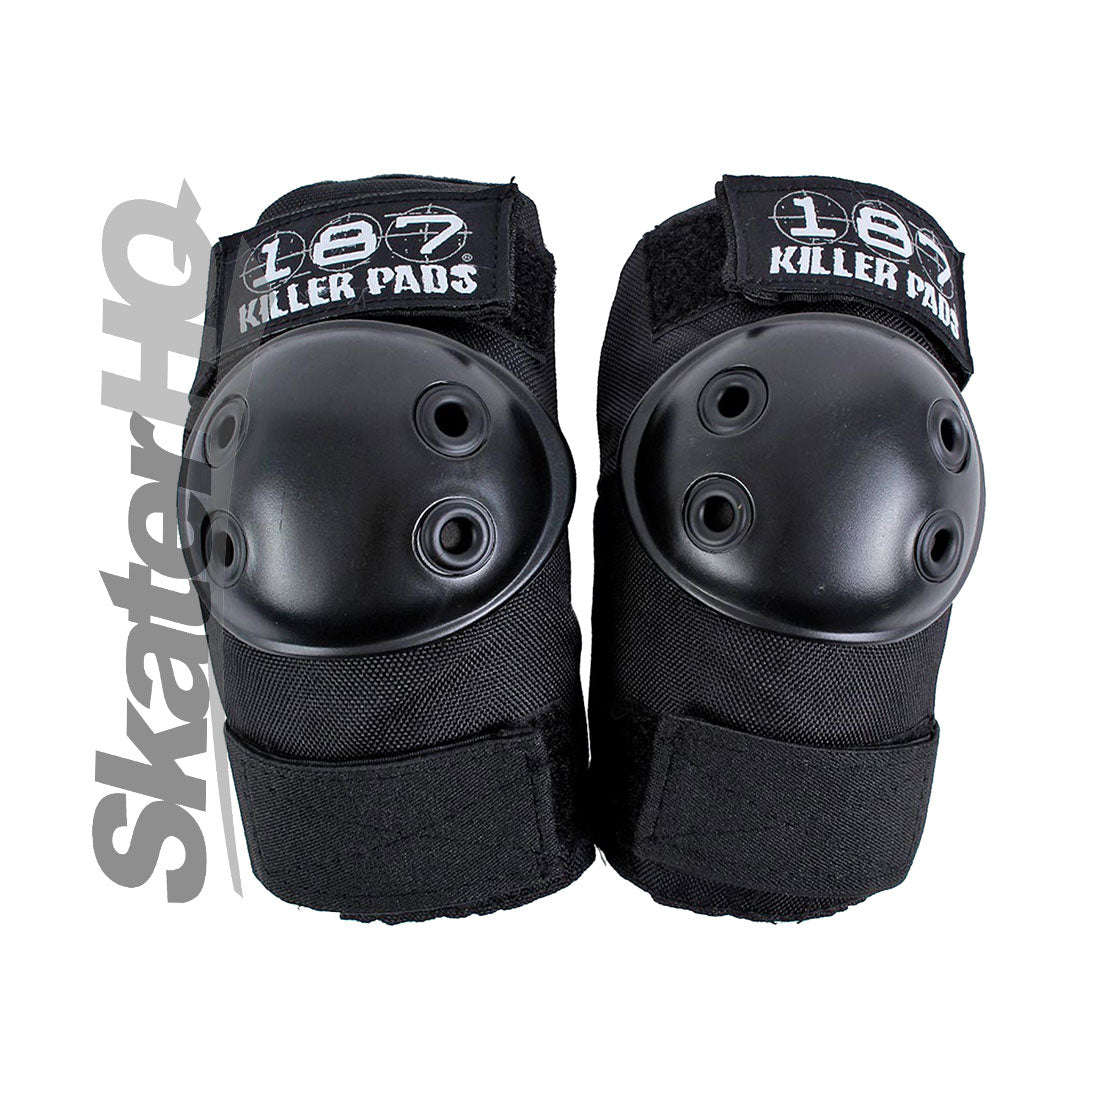 187 Elbow Pads - Black Protective Gear